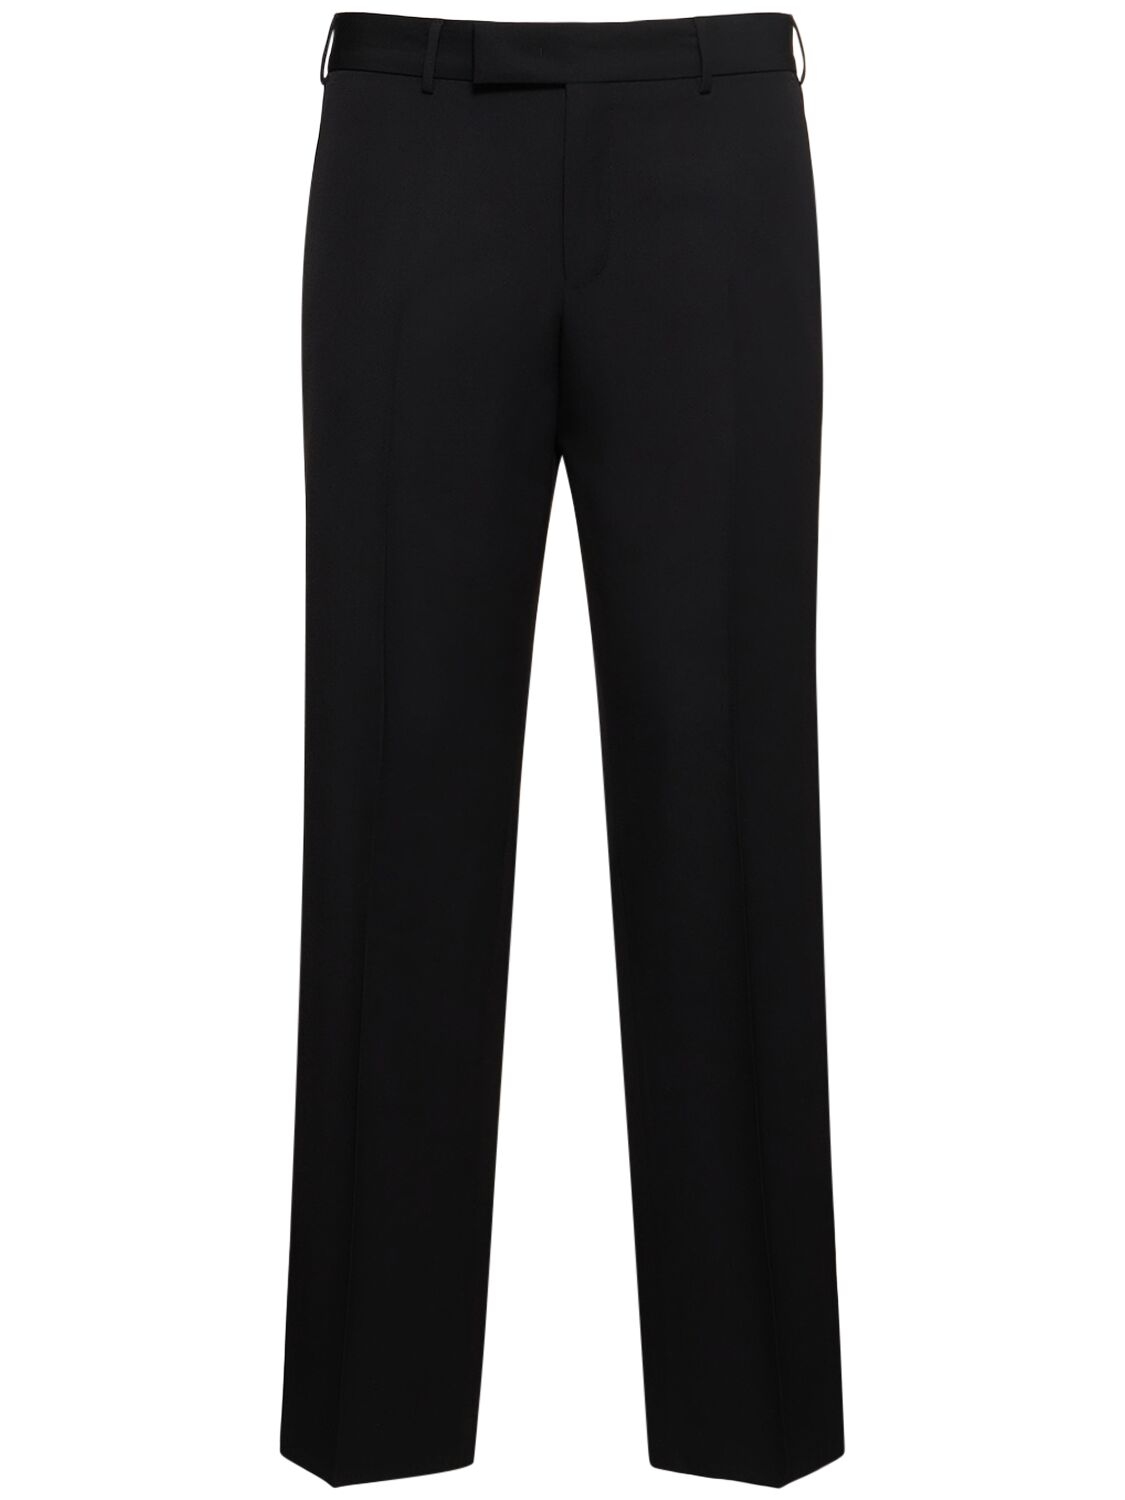 Pt Torino Freedom Flat Front Wool Pants In Black